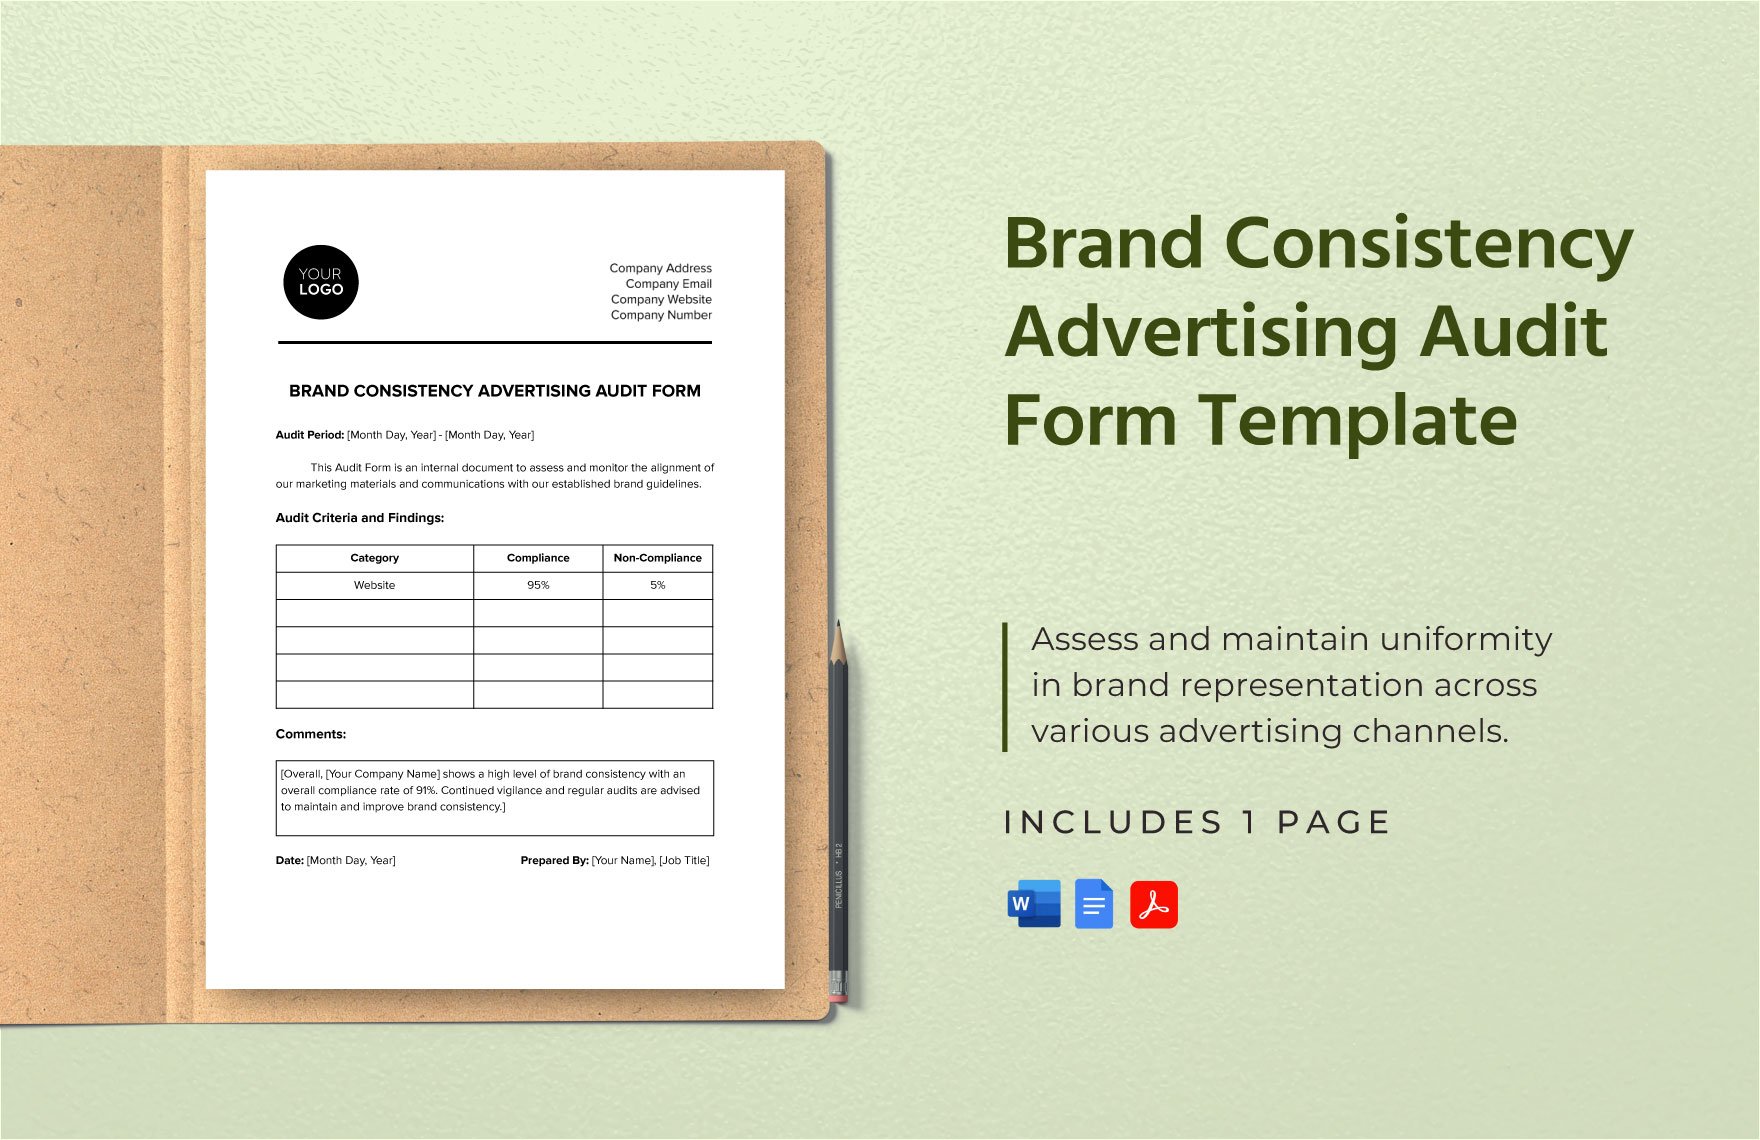 Brand Consistency Advertising Audit Form Template in Word, Google Docs, PDF